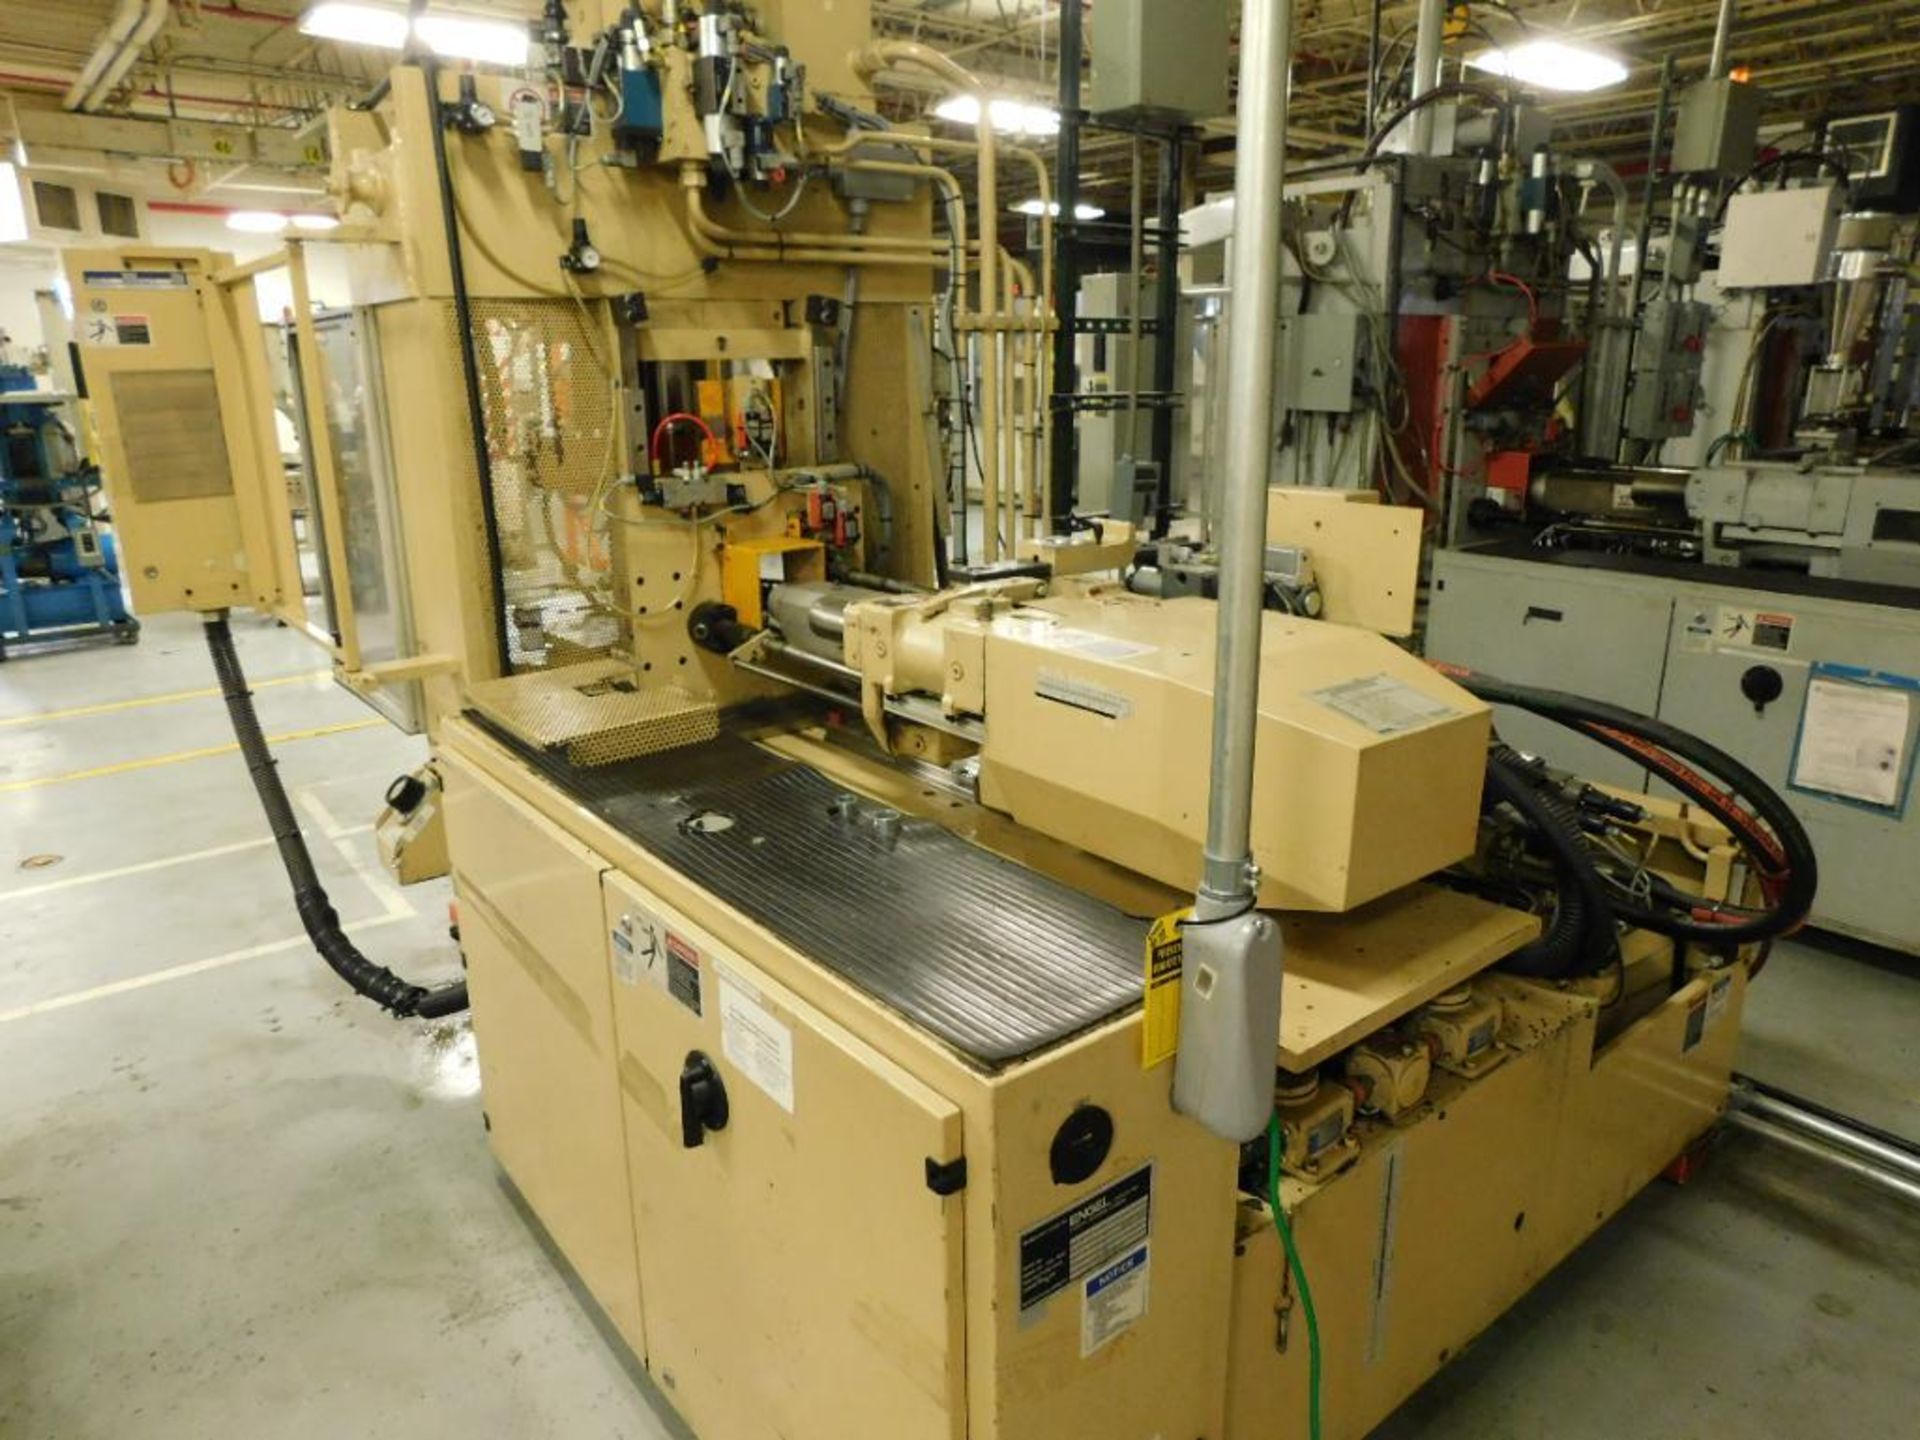 2001 Engel ES200H/55VRB Plastic Injection Molding Machine, 55-Ton Capacity, Vertical, S/N 70998/055/ - Image 4 of 5